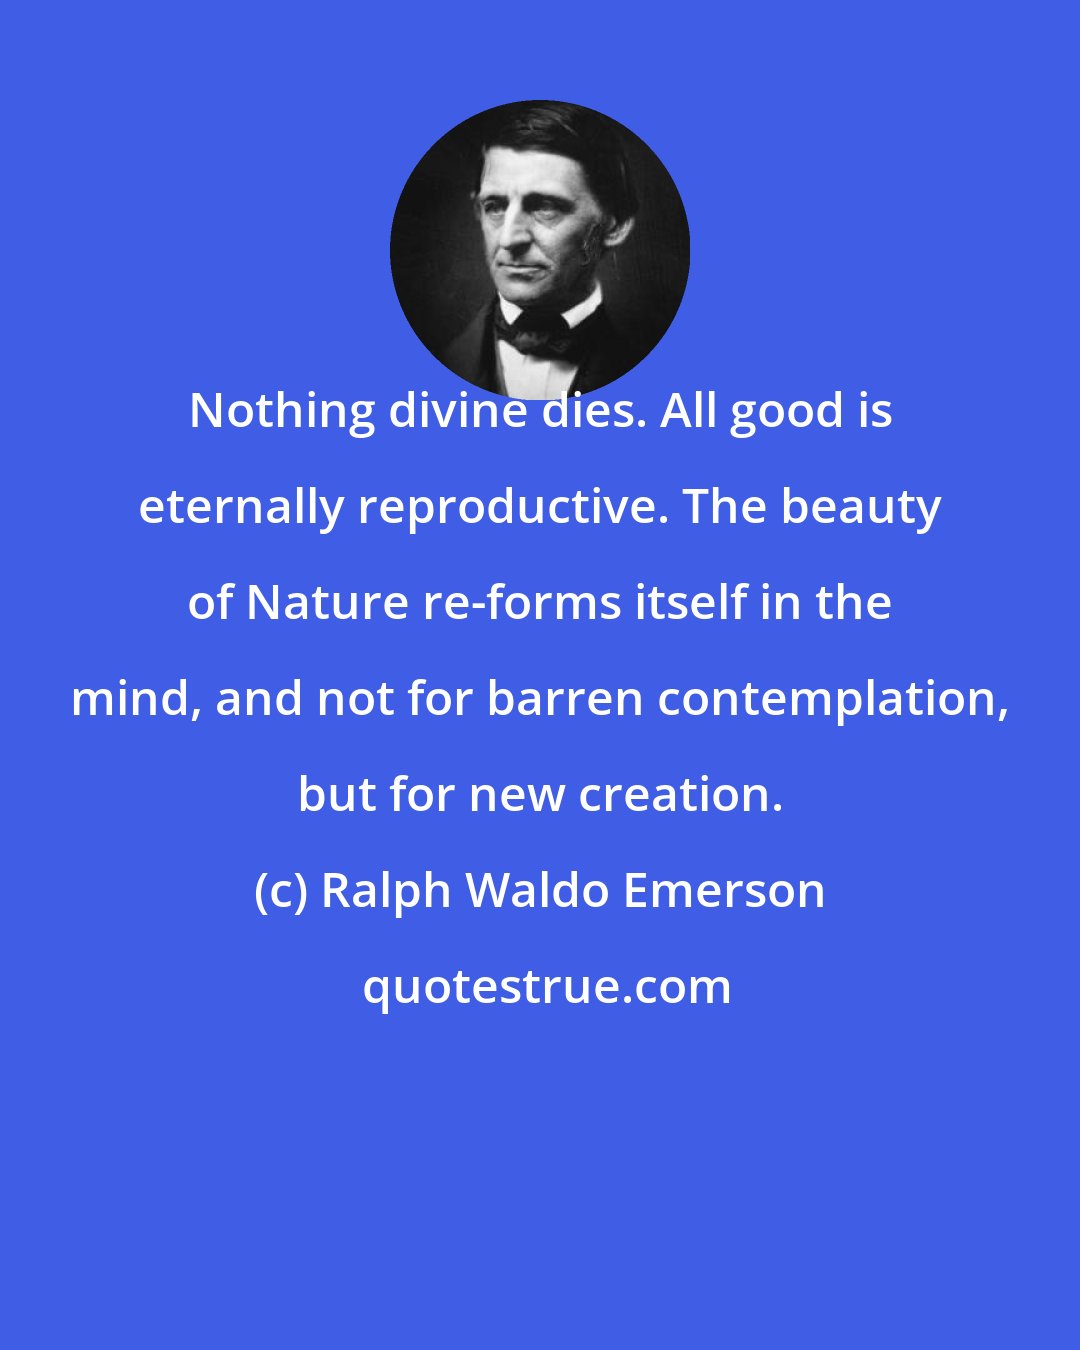 Ralph Waldo Emerson: Nothing divine dies. All good is eternally reproductive. The beauty of Nature re-forms itself in the mind, and not for barren contemplation, but for new creation.